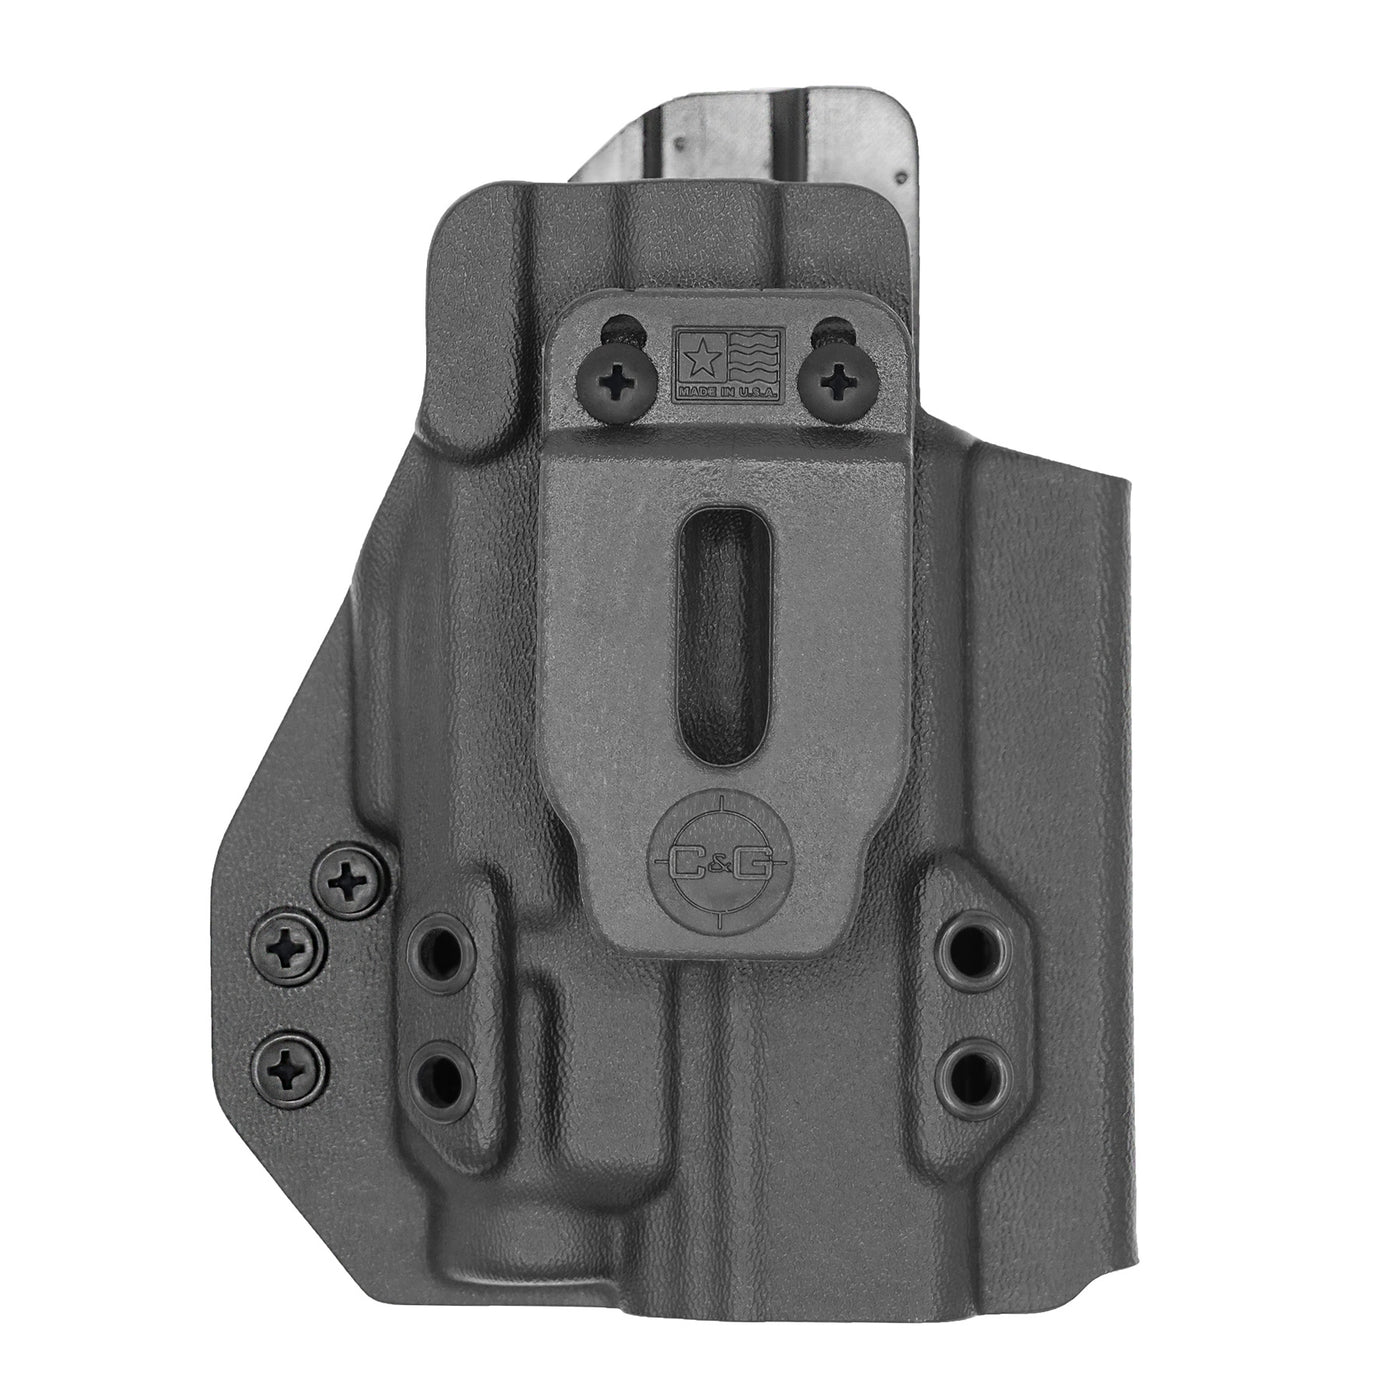 C&G Holsters quickship IWB Tactical CZ p10/c streamlight tlr7/a